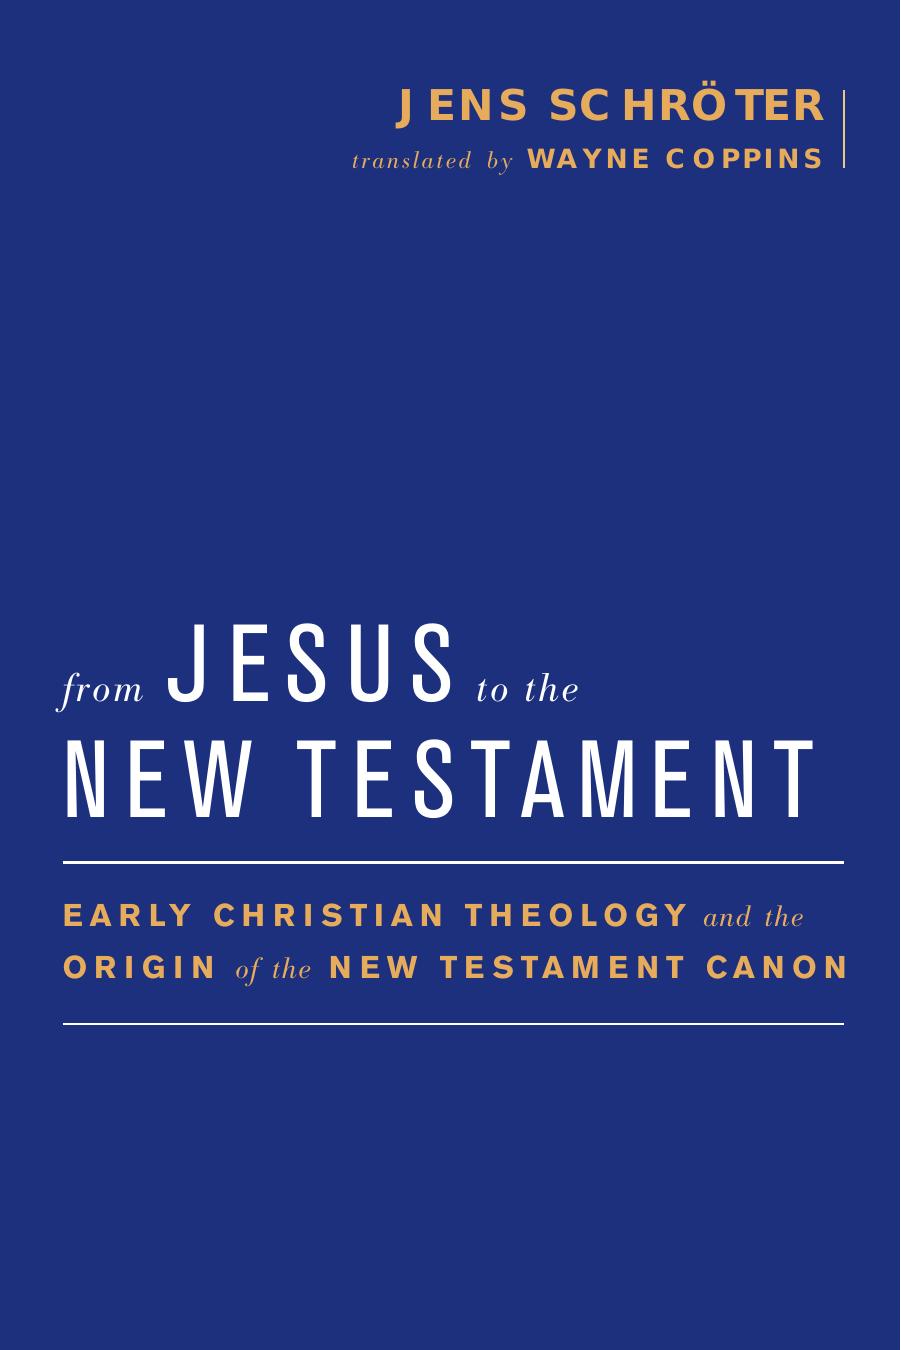 Baylor-Mohr Siebeck Studies in Early Christianity : From Jesus to the New Testament : Early Christian Theology and the Origin of the New Testament Canon